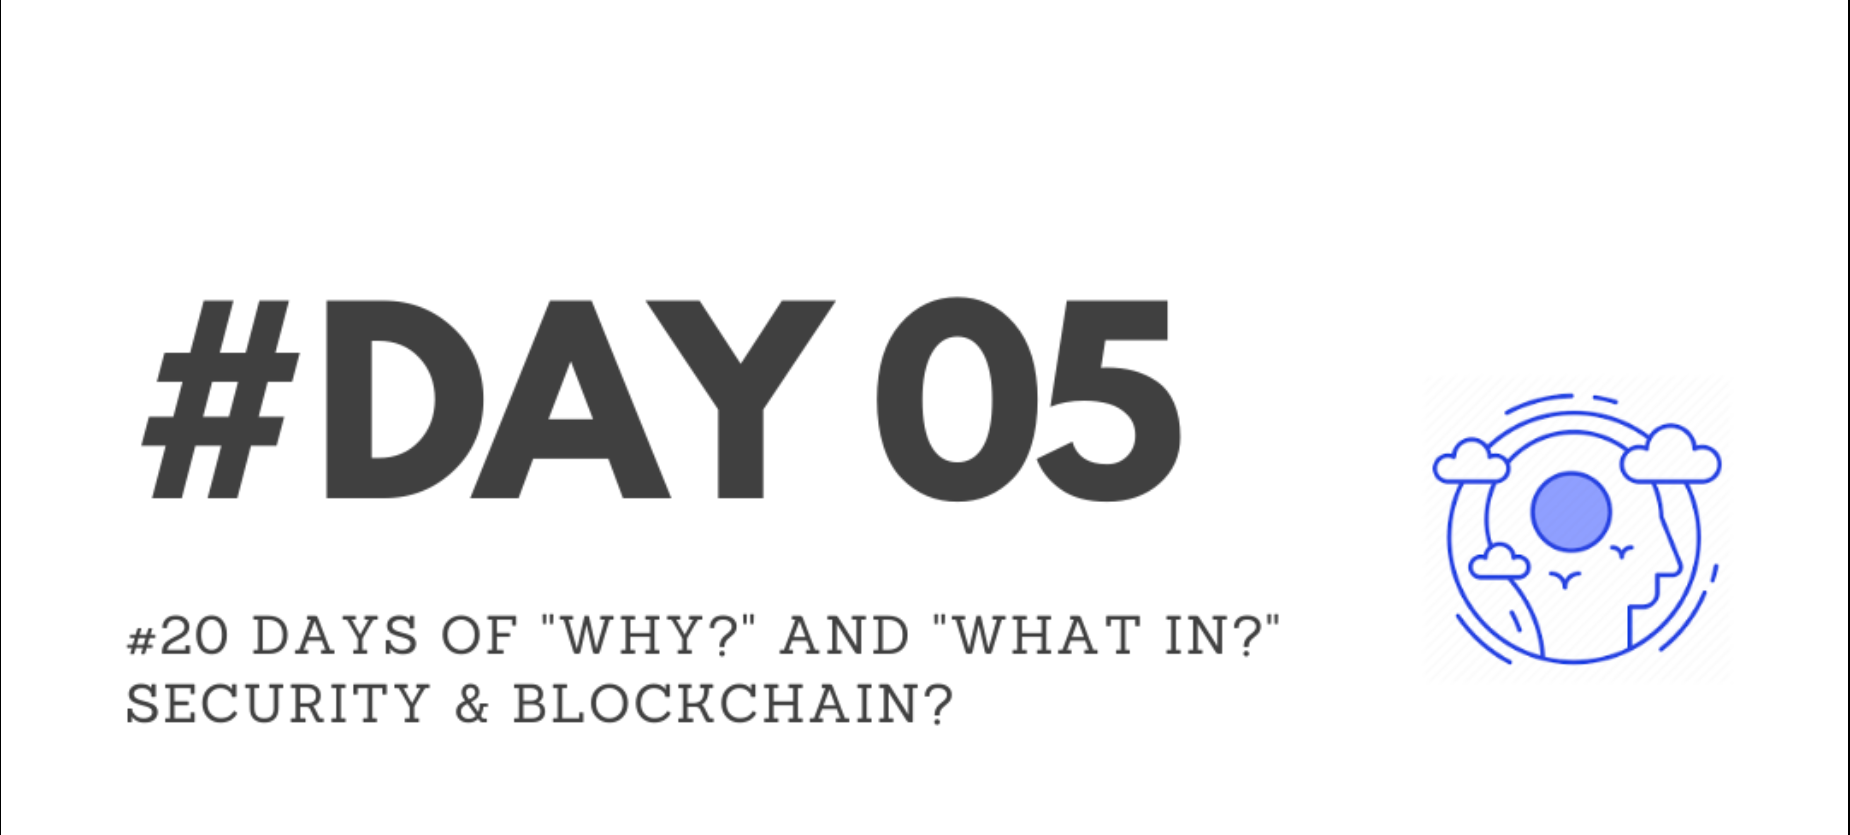 Day05 – “Why?” & “What in?” Security & Blockchain?